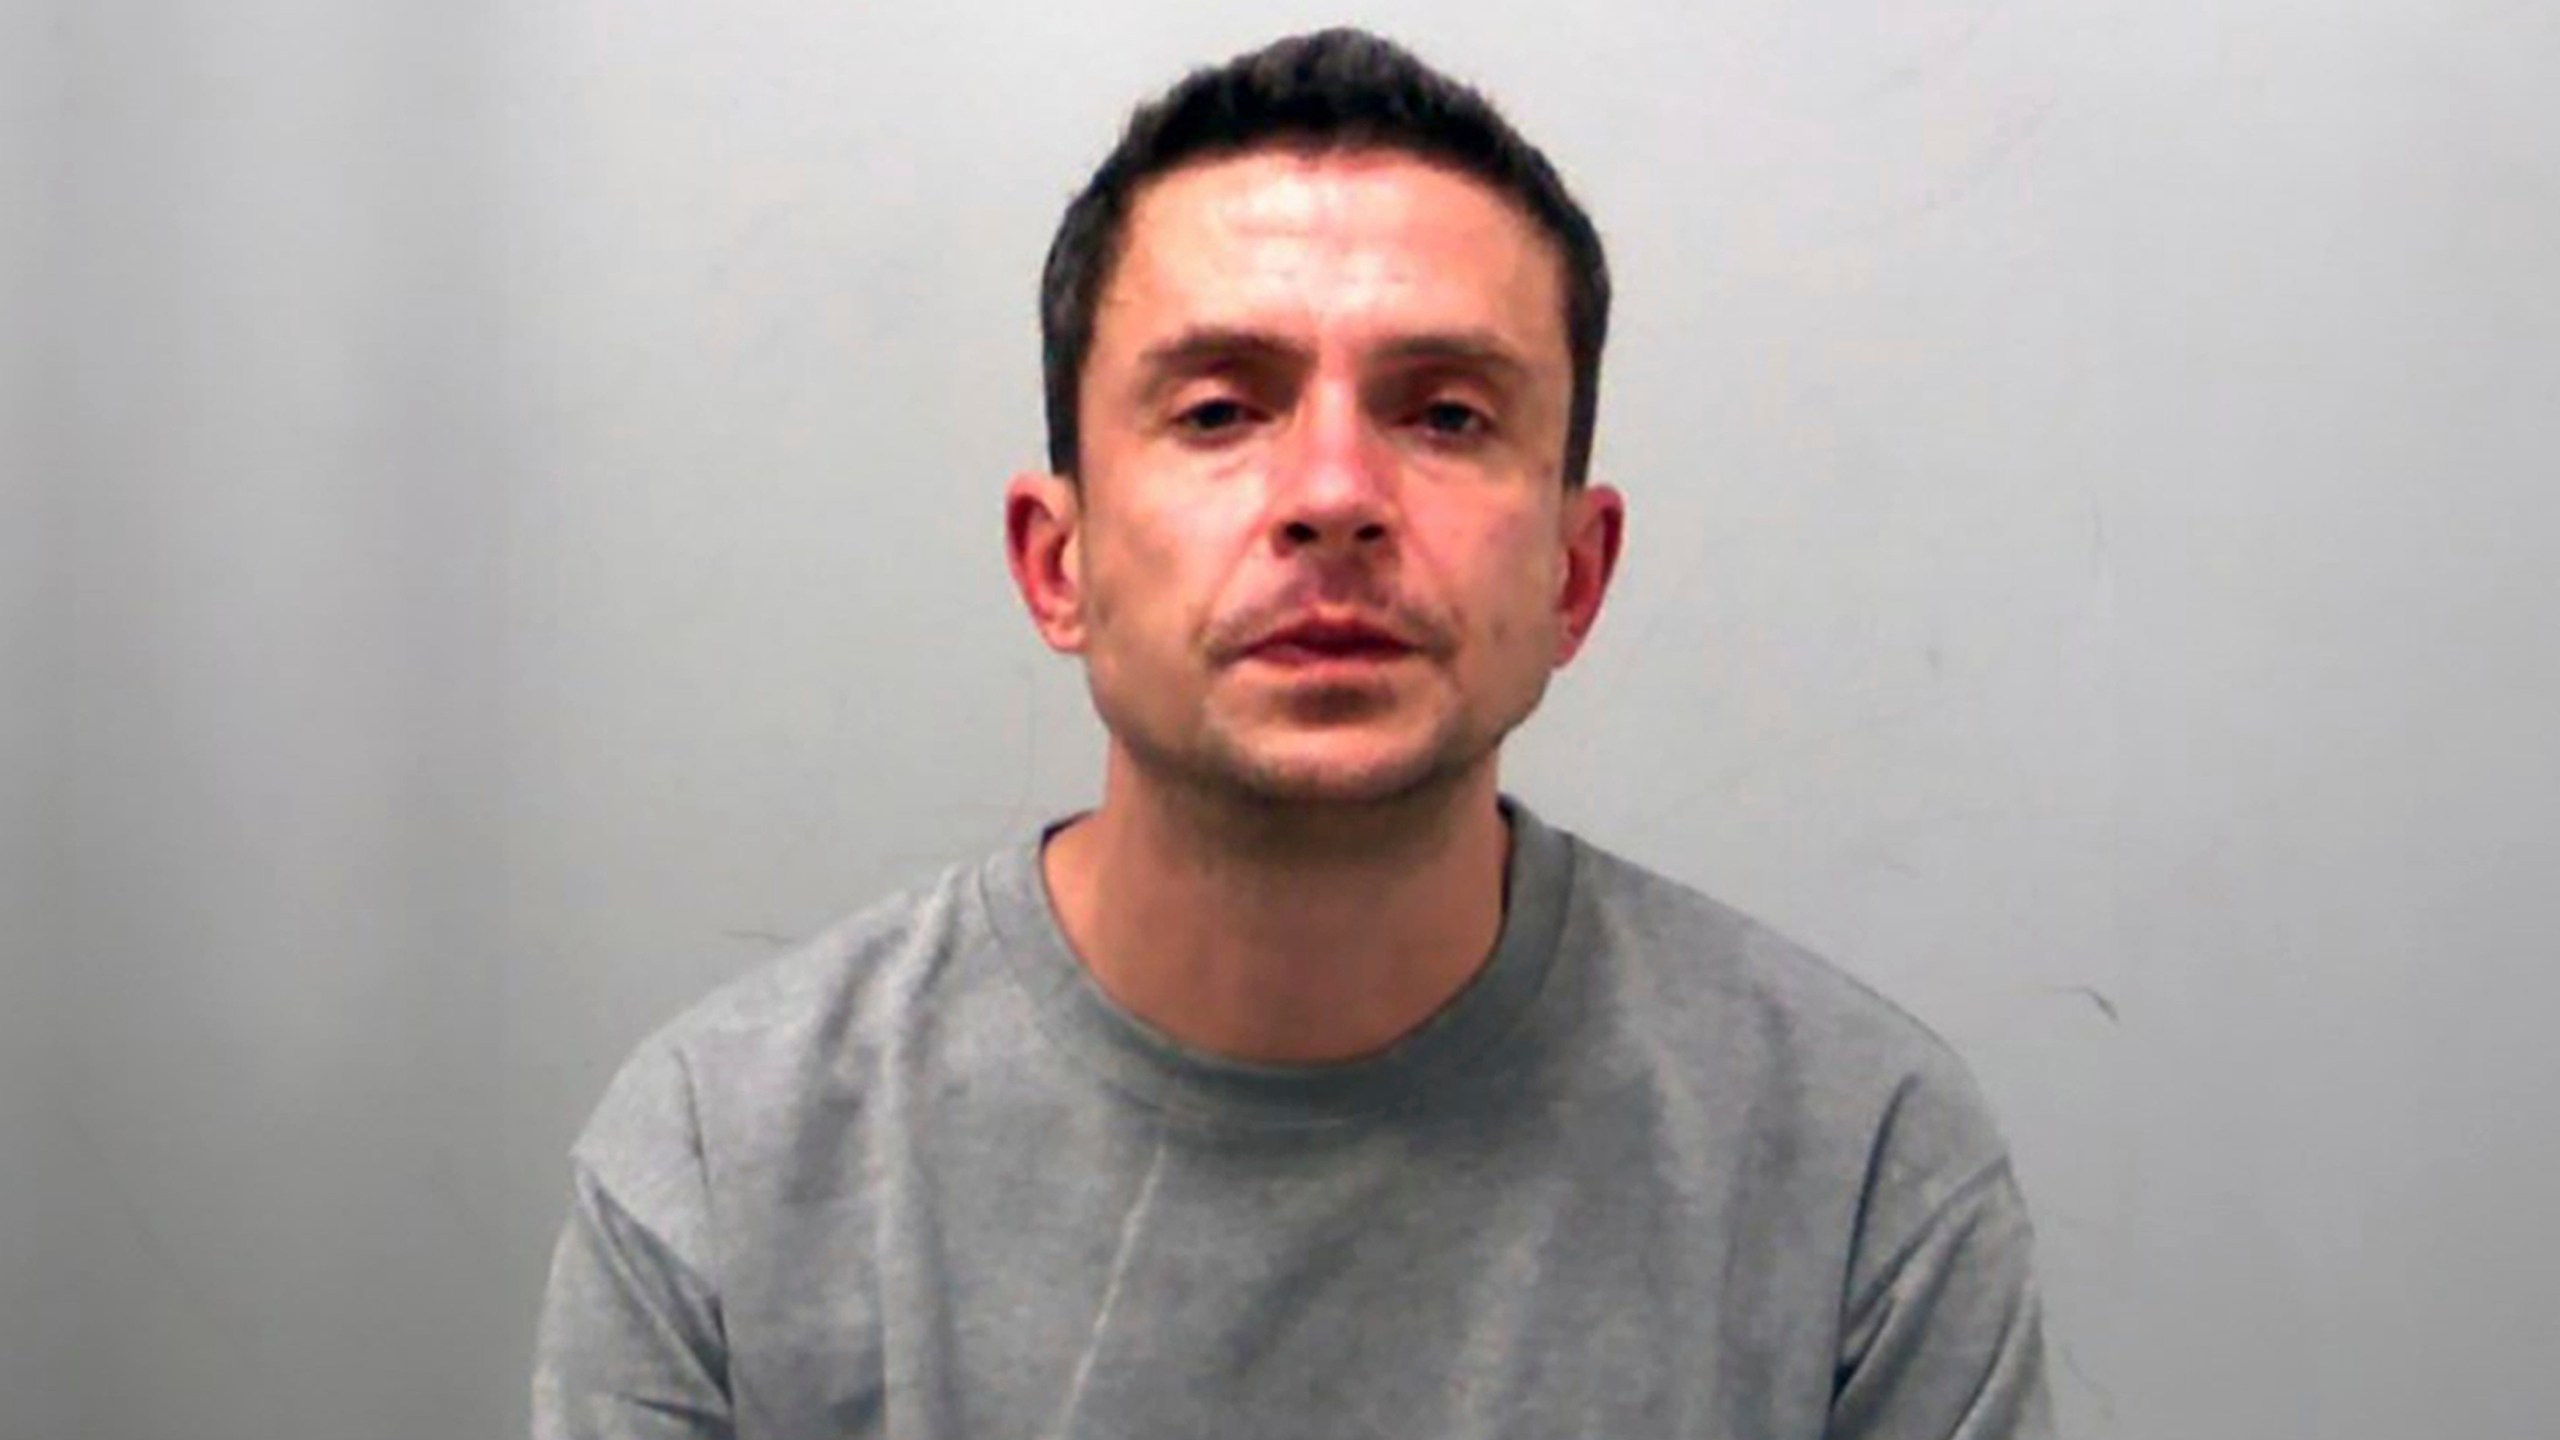 This undated photo issued by Essex Police on Tuesday March 19, 2024 shows Nicholas Hawkes, 39, a convicted sex offender who sent unsolicited photos of his genitals to a girl and a woman, was the first person in England and Wales convicted of violating the Online Safety Act. England's first convicted cyber-flasher was sentenced Tuesday to 5 1/2 years in prison. (Essex Police via AP)